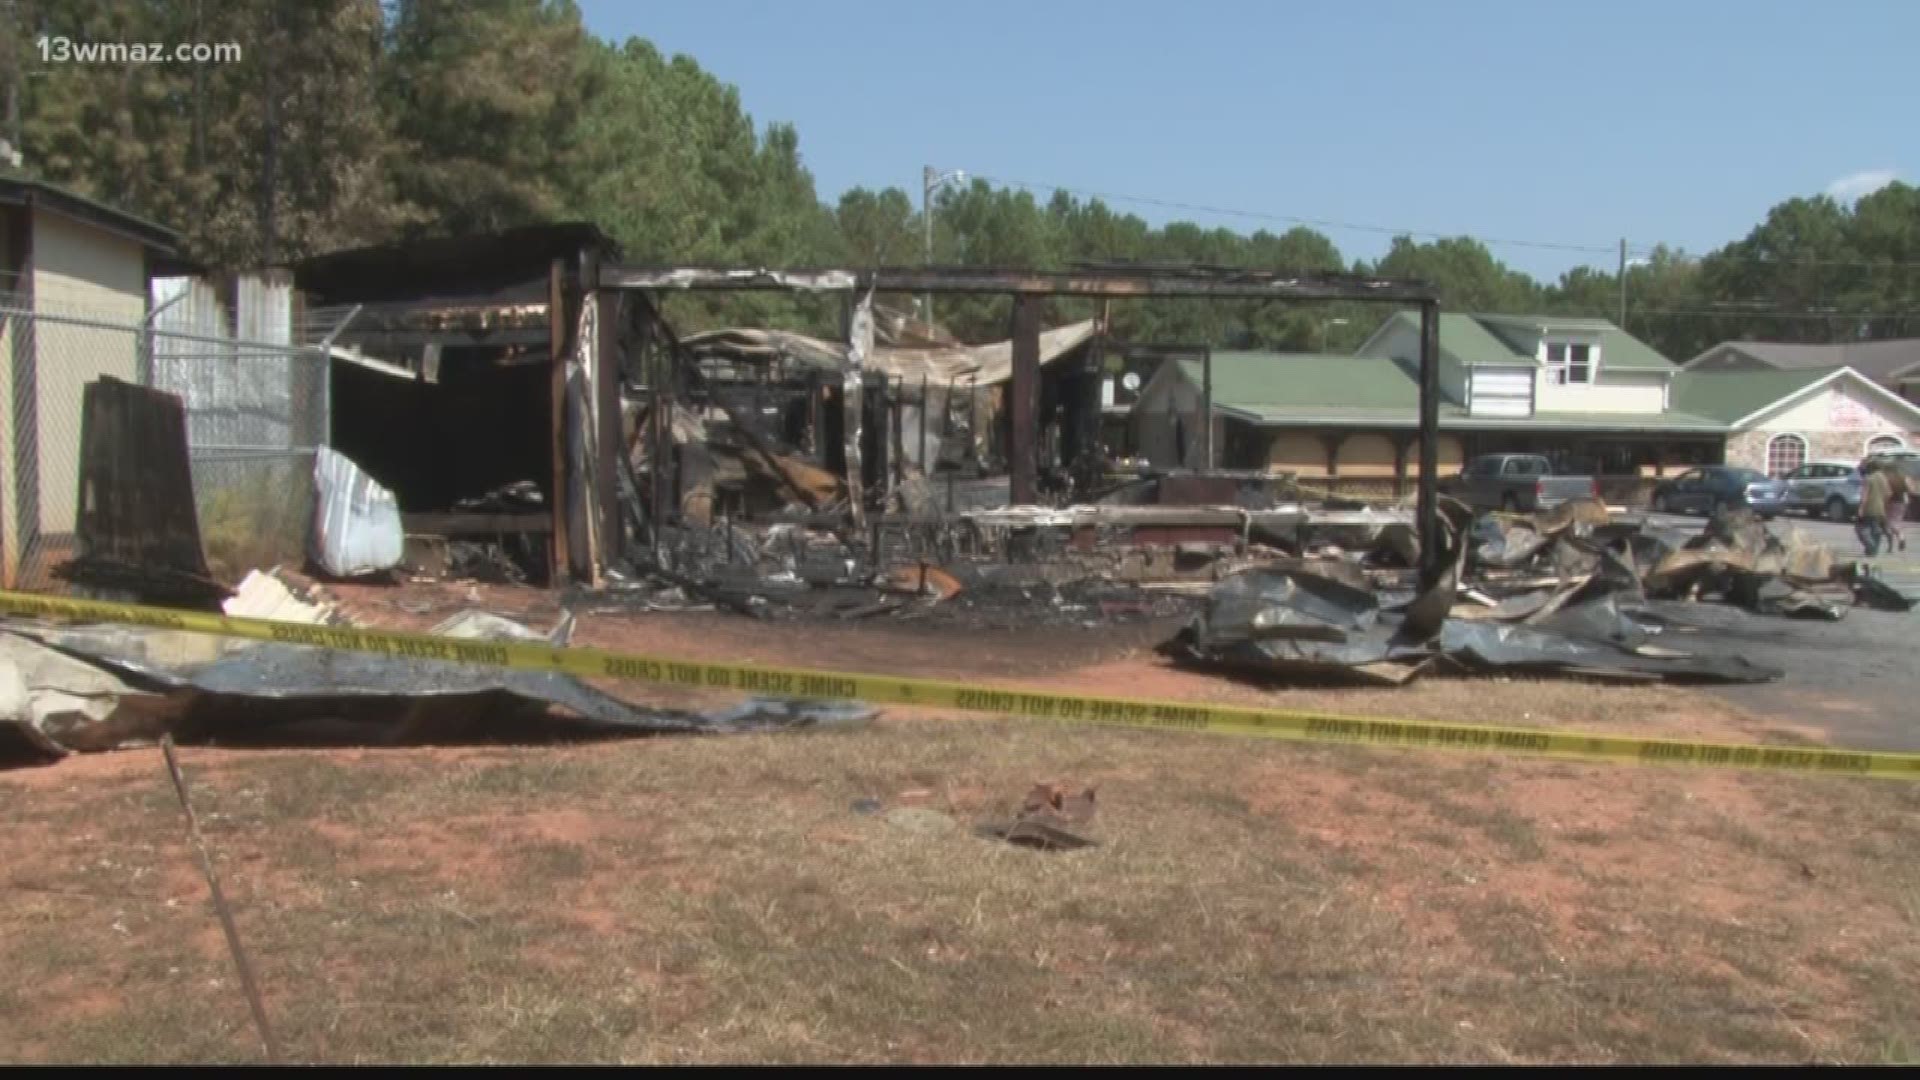 A Monroe County man killed himself at his ex-wife's house hours after a suspicious fire destroyed a bar he co-owned.